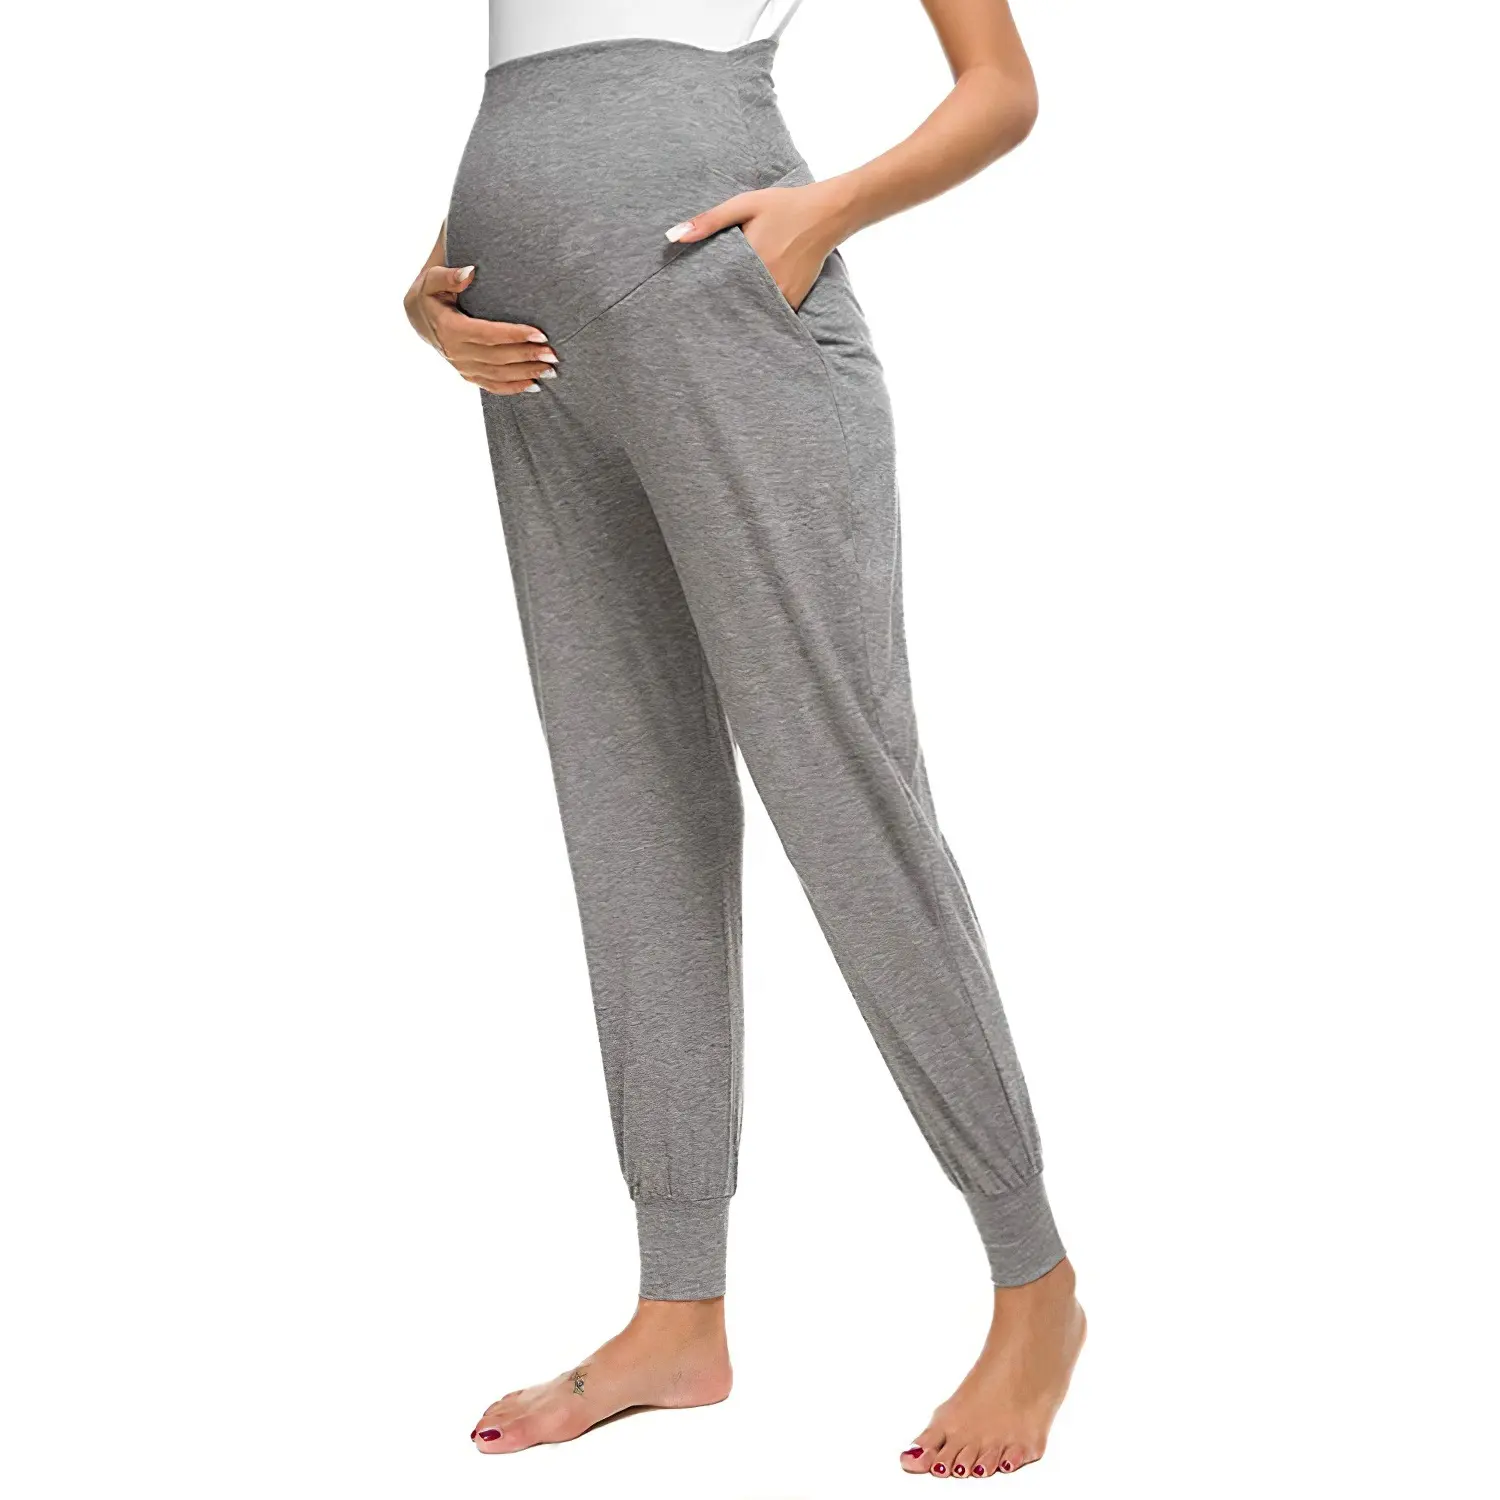 High Waist Maternity Pants Fashion Elastic Knitted Pregnancy Clothes Pregnant Women Jogger Pants